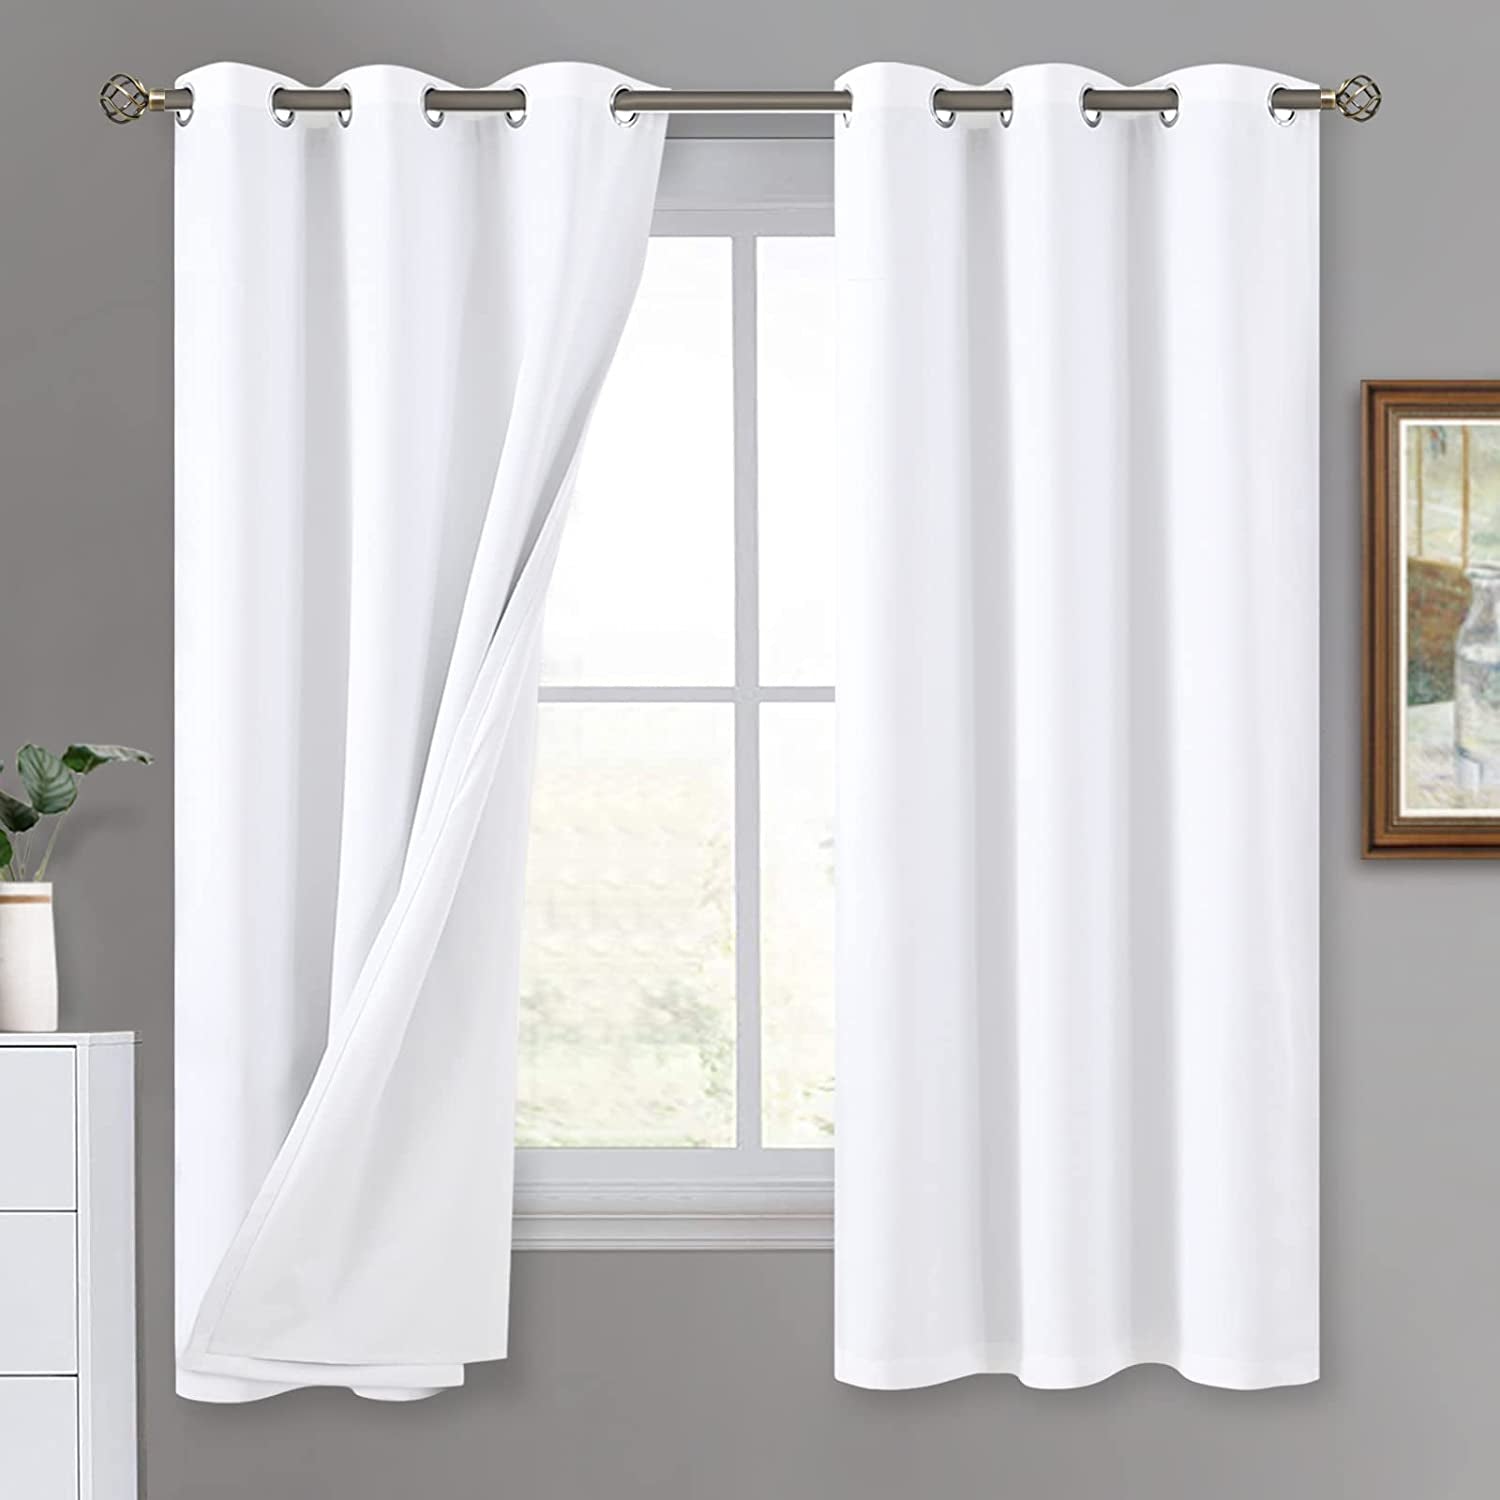 QUEMAS Short Blackout Curtains 54 Inch Length 2 Panels, 100% Light Blocking Thermal Insulated Soundproof Grommet Small Window Curtains for Bedroom Basement with Black Liner, Each 42 Inch Wide, White  QUEMAS   